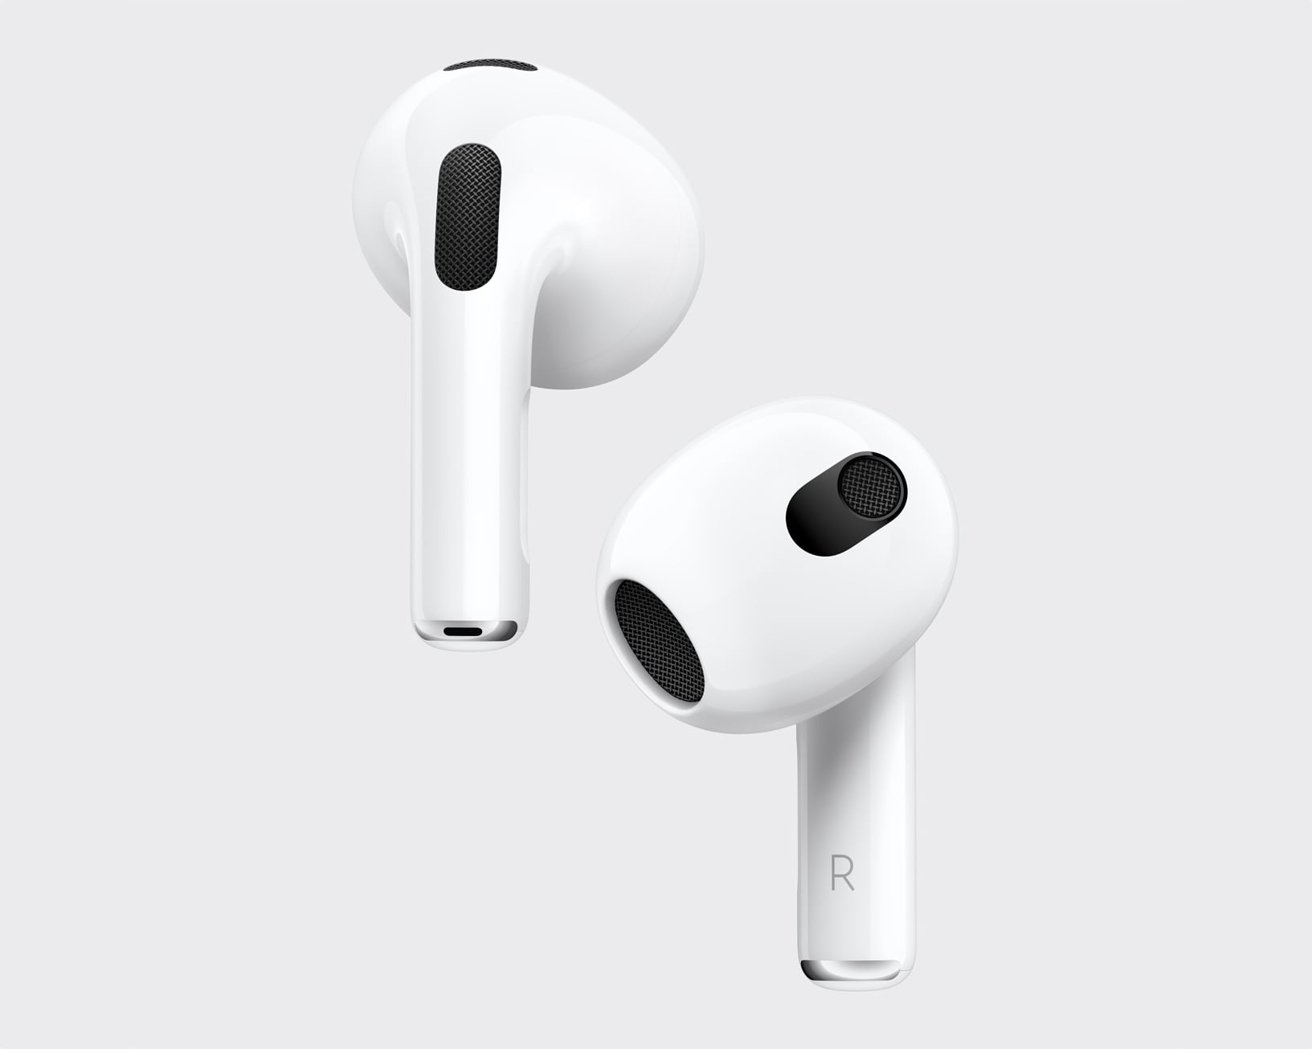 The heads of the third-gen AirPods are slightly angled for a better fit. 